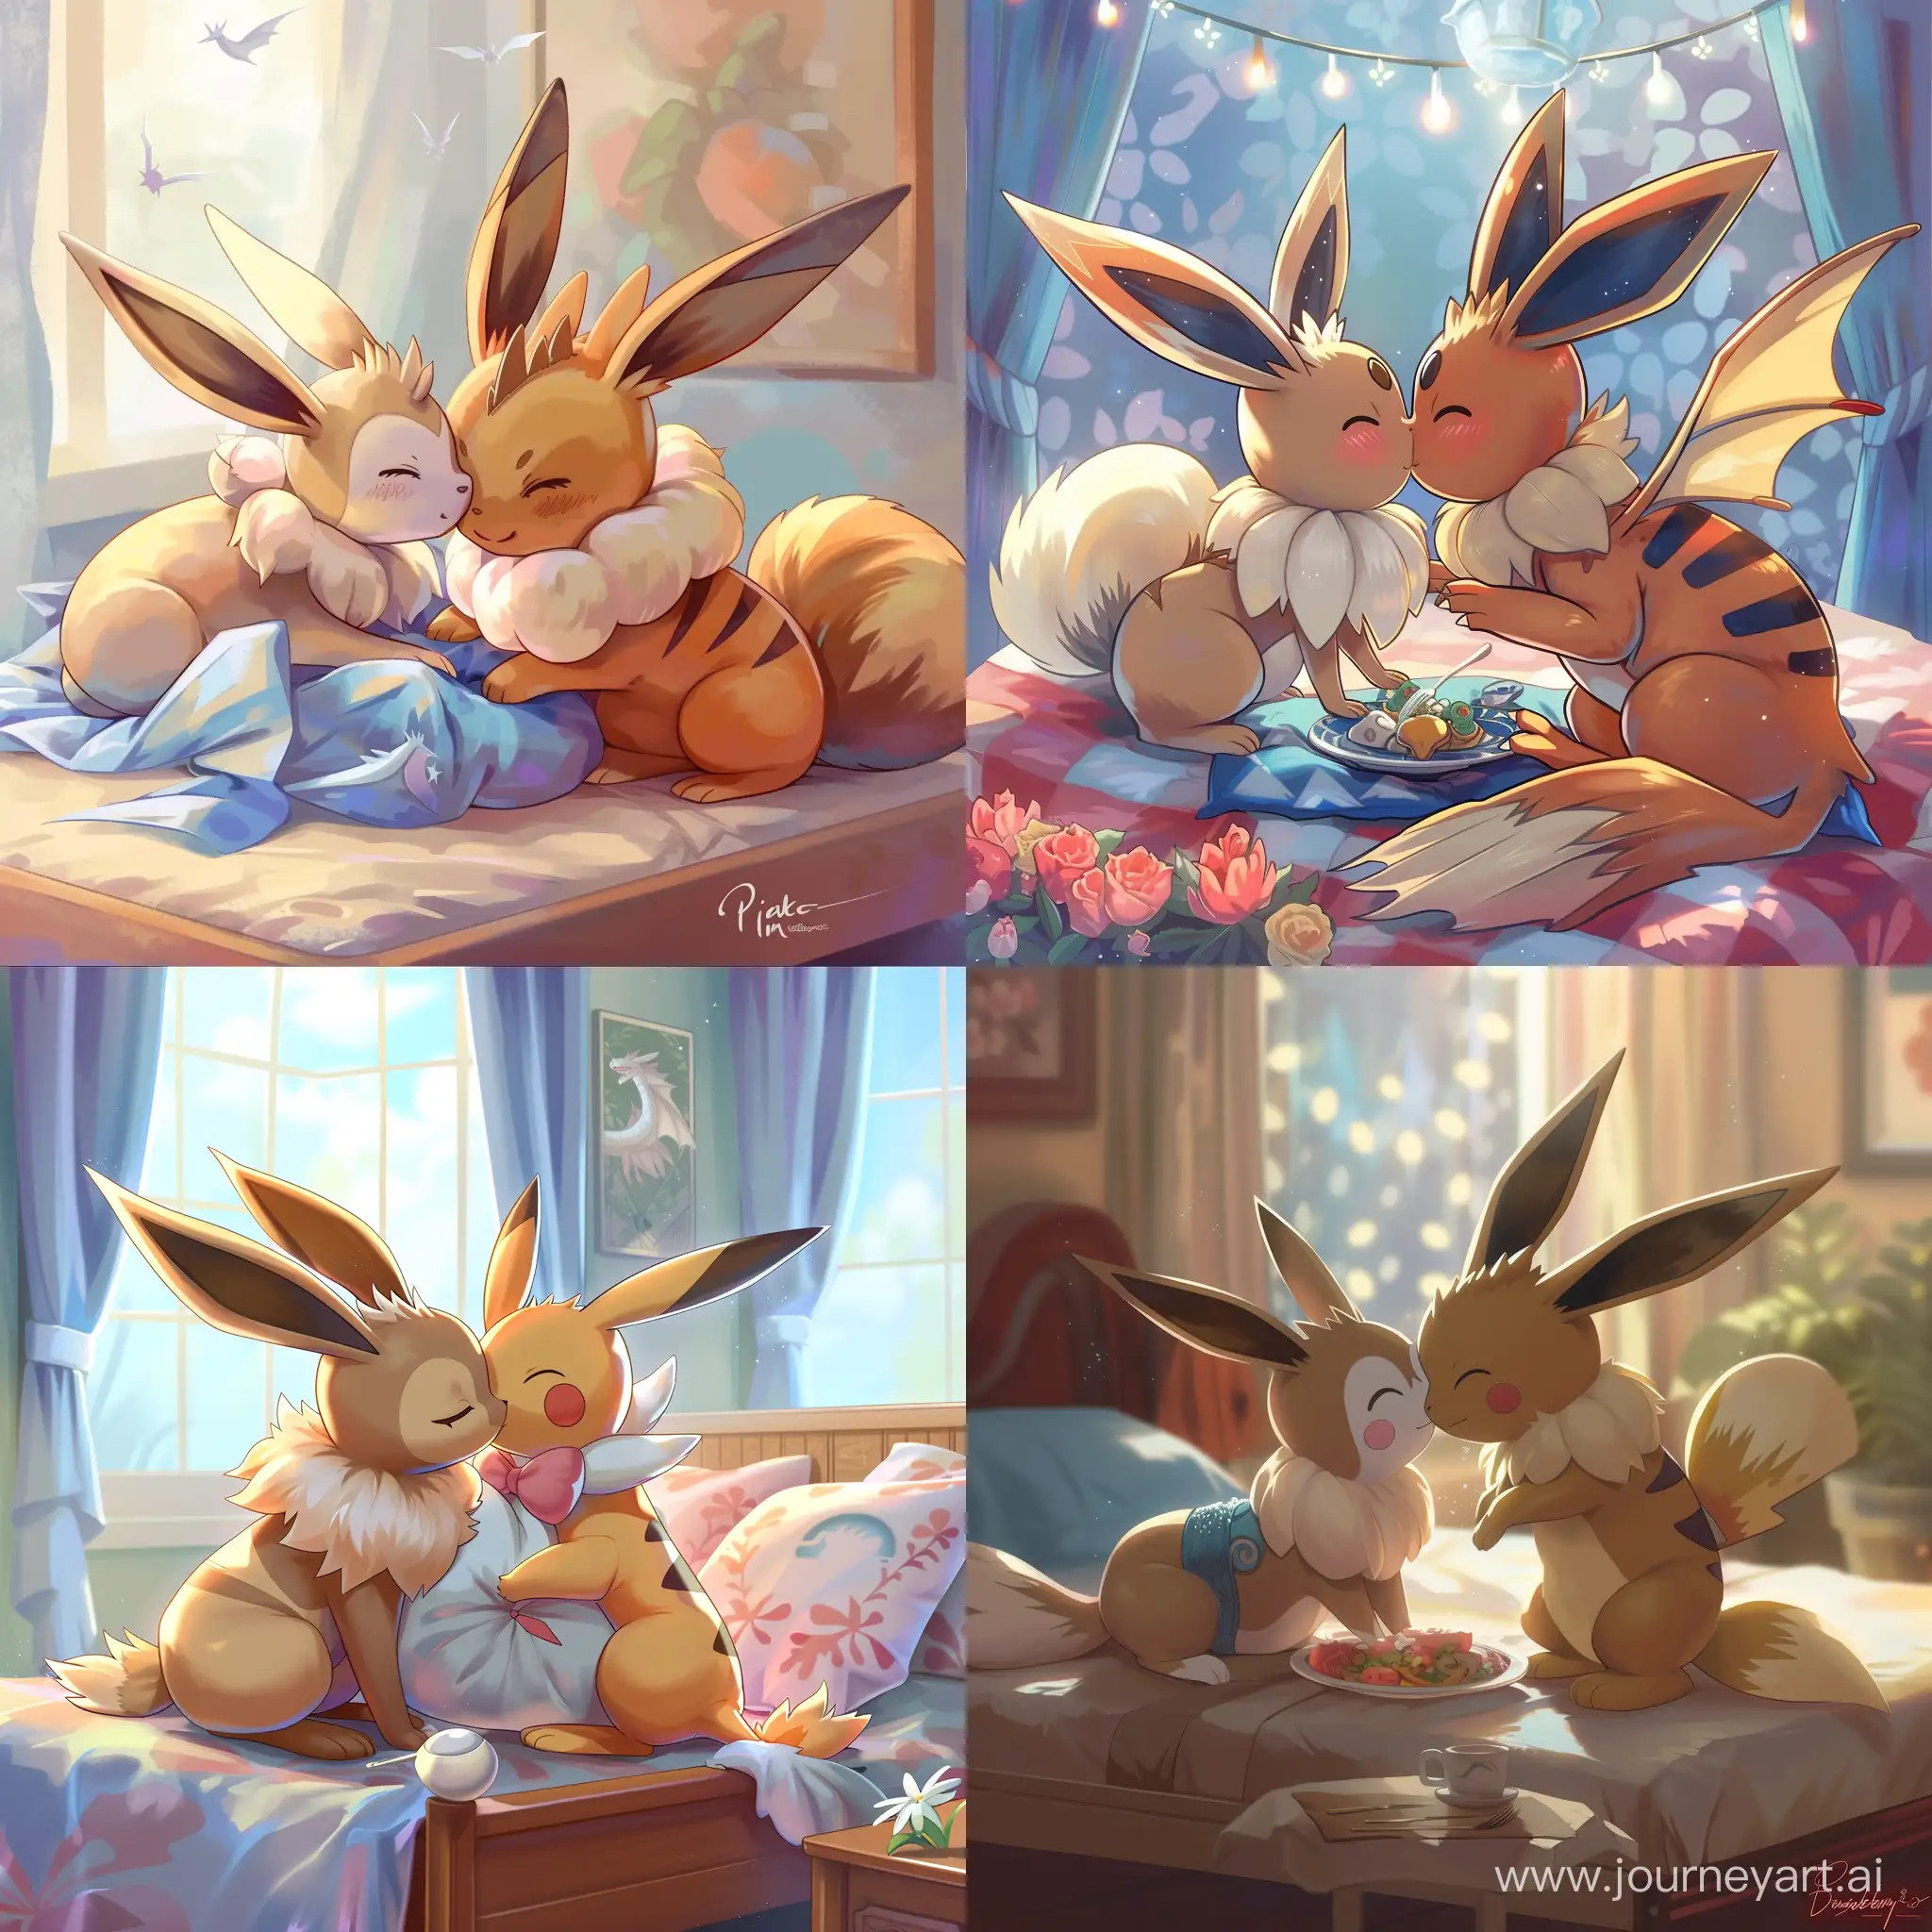 Eevee kissing Sylveon on Pikachu's bed after dinner with Dragonite